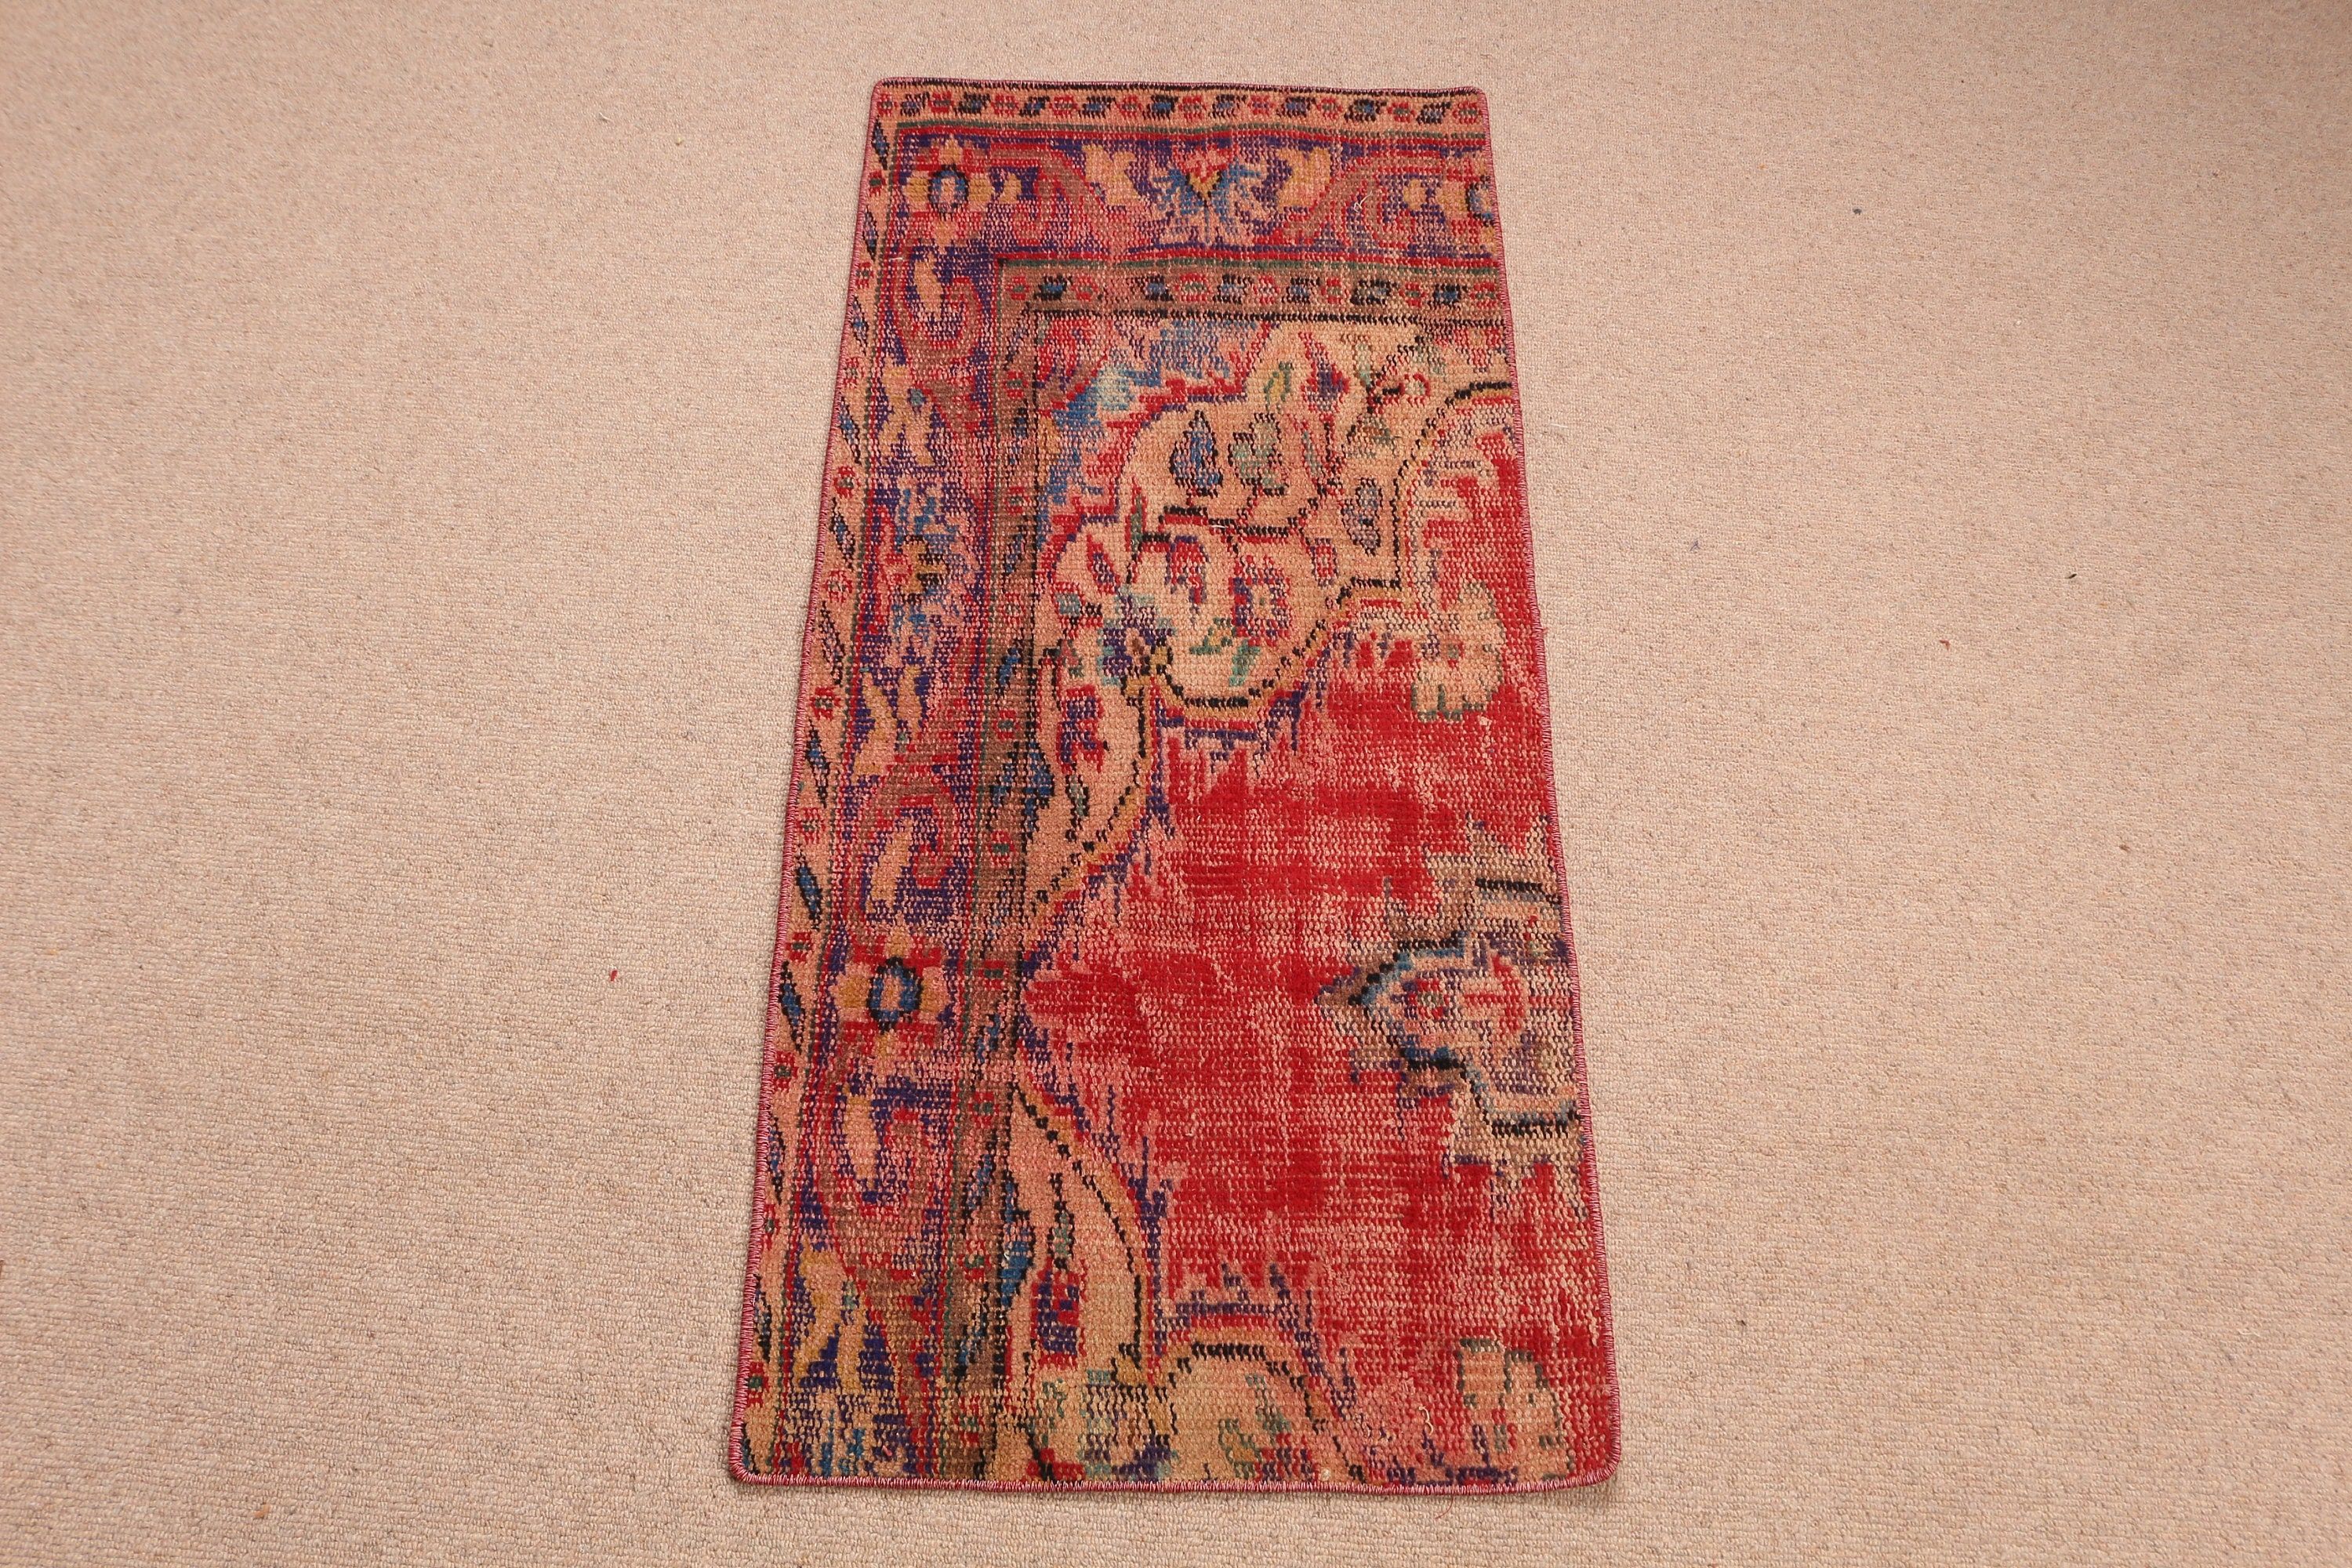 Red Floor Rugs, Bedroom Rug, Moroccan Rugs, Turkish Rugs, 1.7x3.6 ft Small Rug, Kitchen Rug, Rugs for Kitchen, Vintage Rug, Cute Rugs